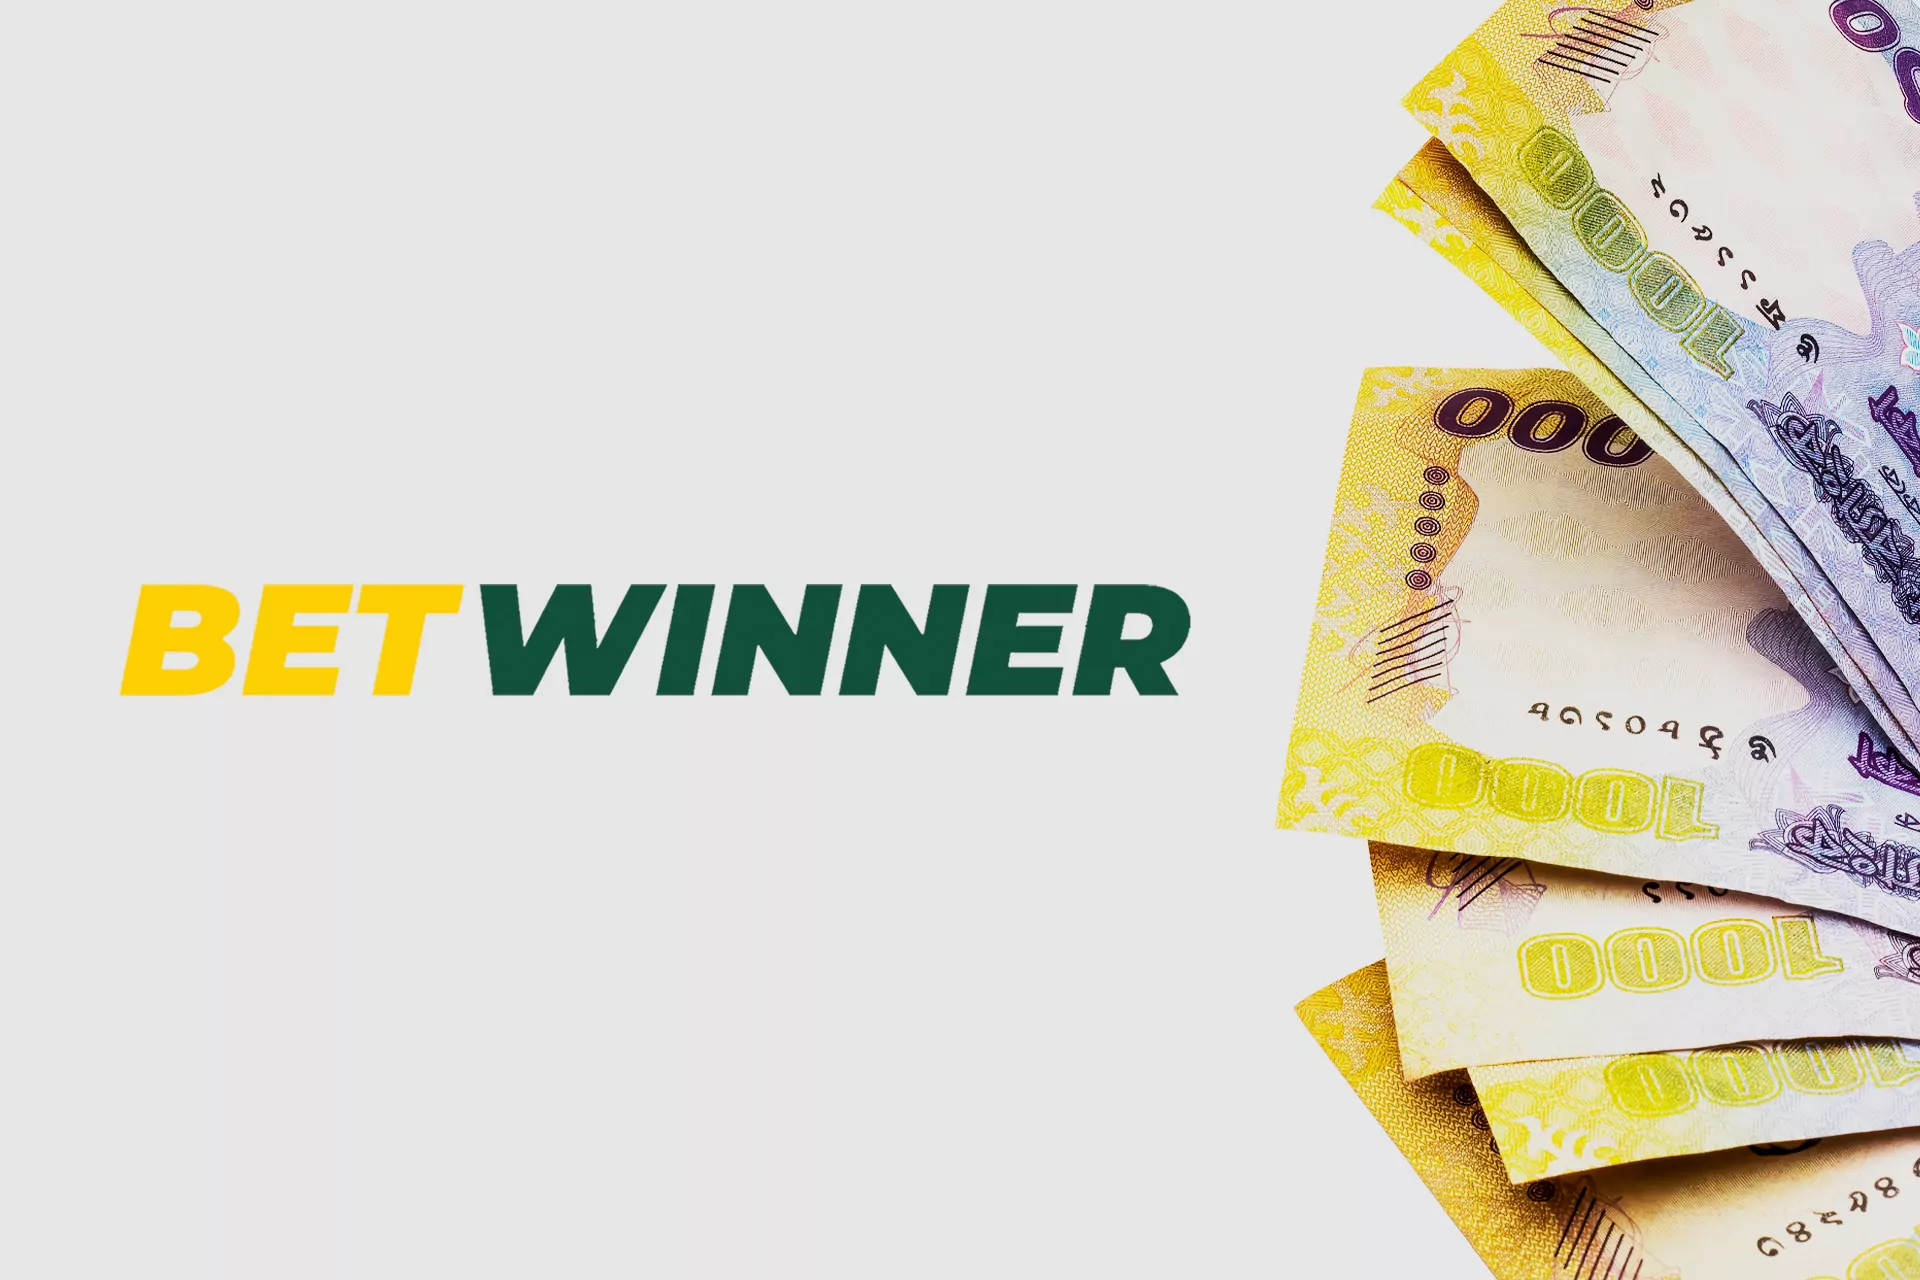 BetWinner has one of the biggest lists of supported payment systems.